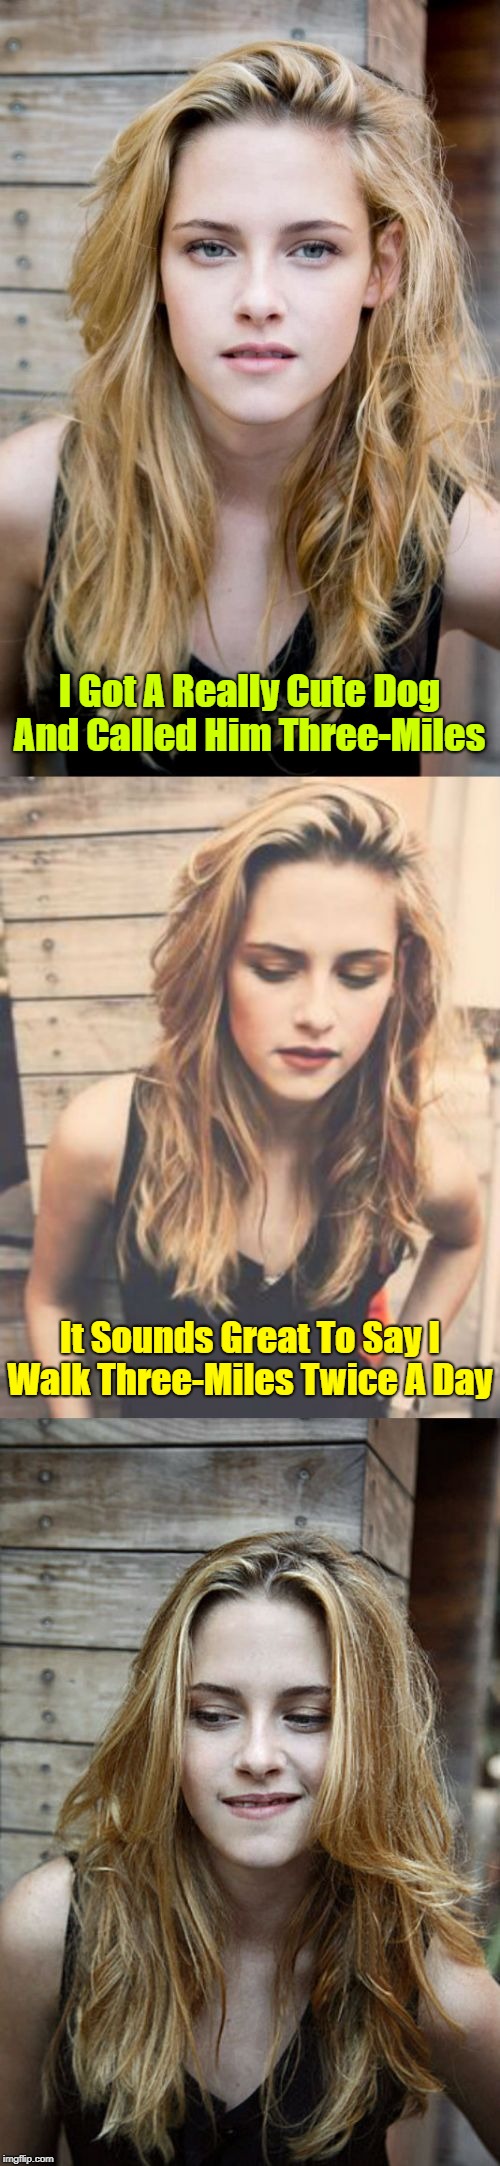 What can I say, I hate exercising  | I Got A Really Cute Dog And Called Him Three-Miles; It Sounds Great To Say I Walk Three-Miles Twice A Day | image tagged in bad pun kristen stewart 2,memes,exercise,cute dog,easy way to exercise | made w/ Imgflip meme maker